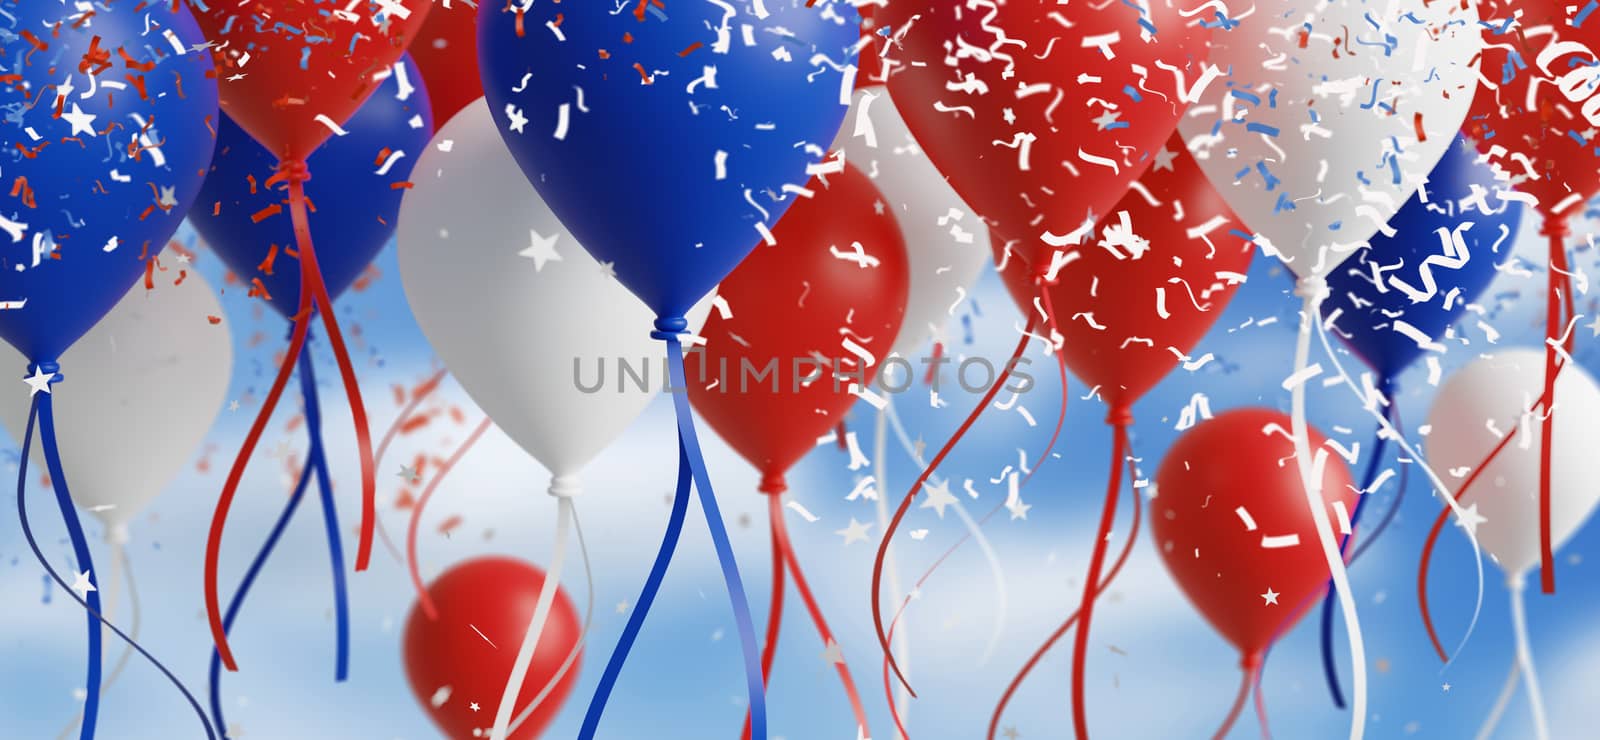 Balloon with confetti falling on sky background 3d render